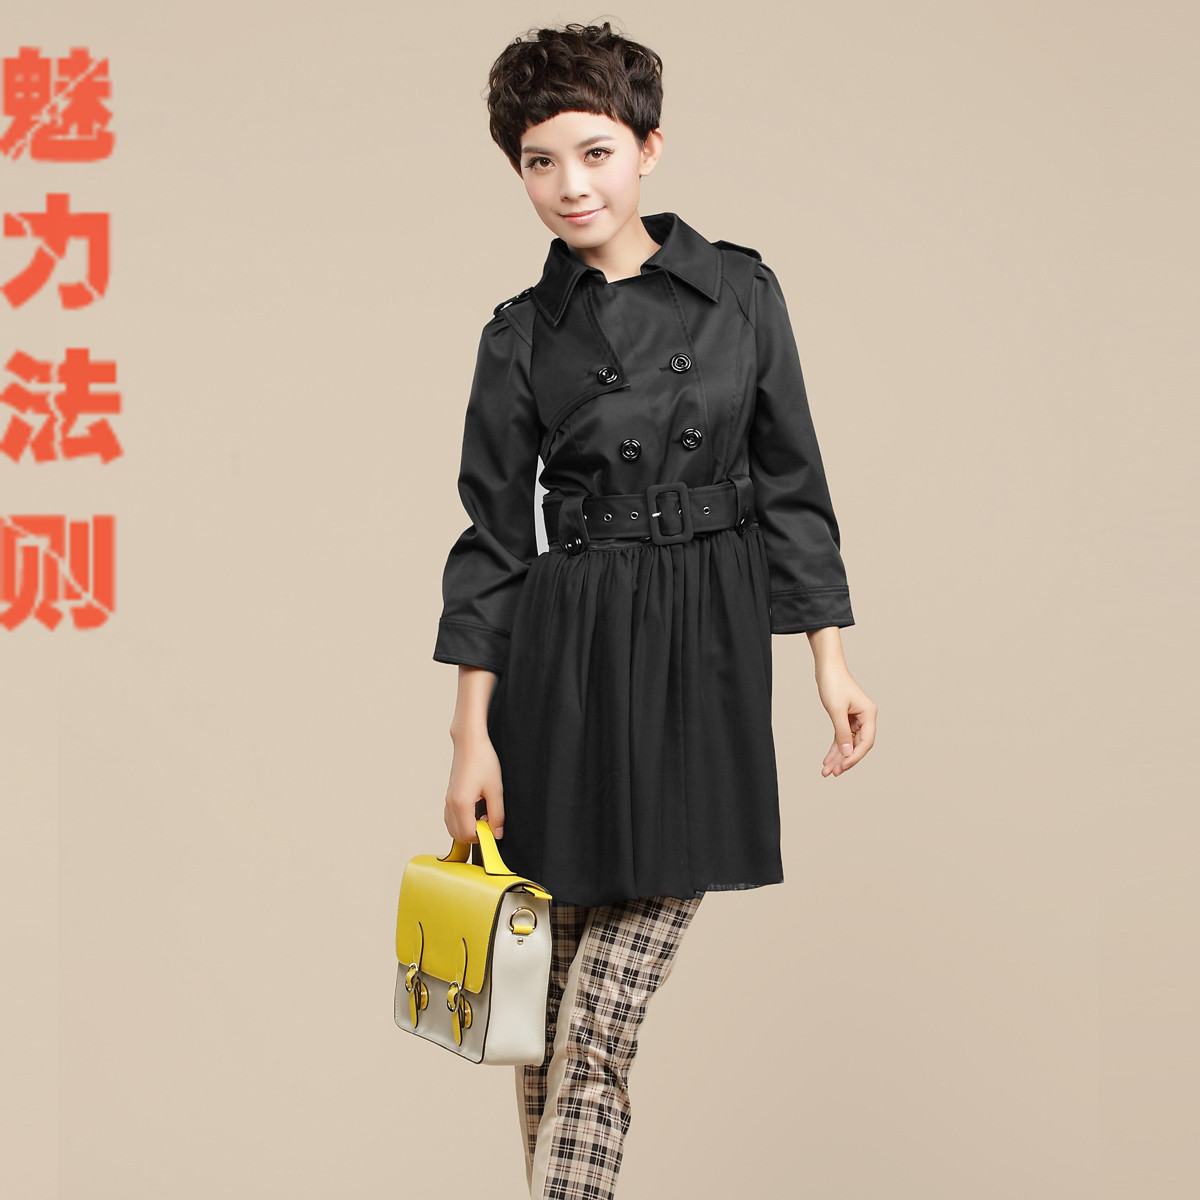 Overcoat outerwear autumn new arrival 2012 women's wrist-length sleeve chiffon patchwork trench female